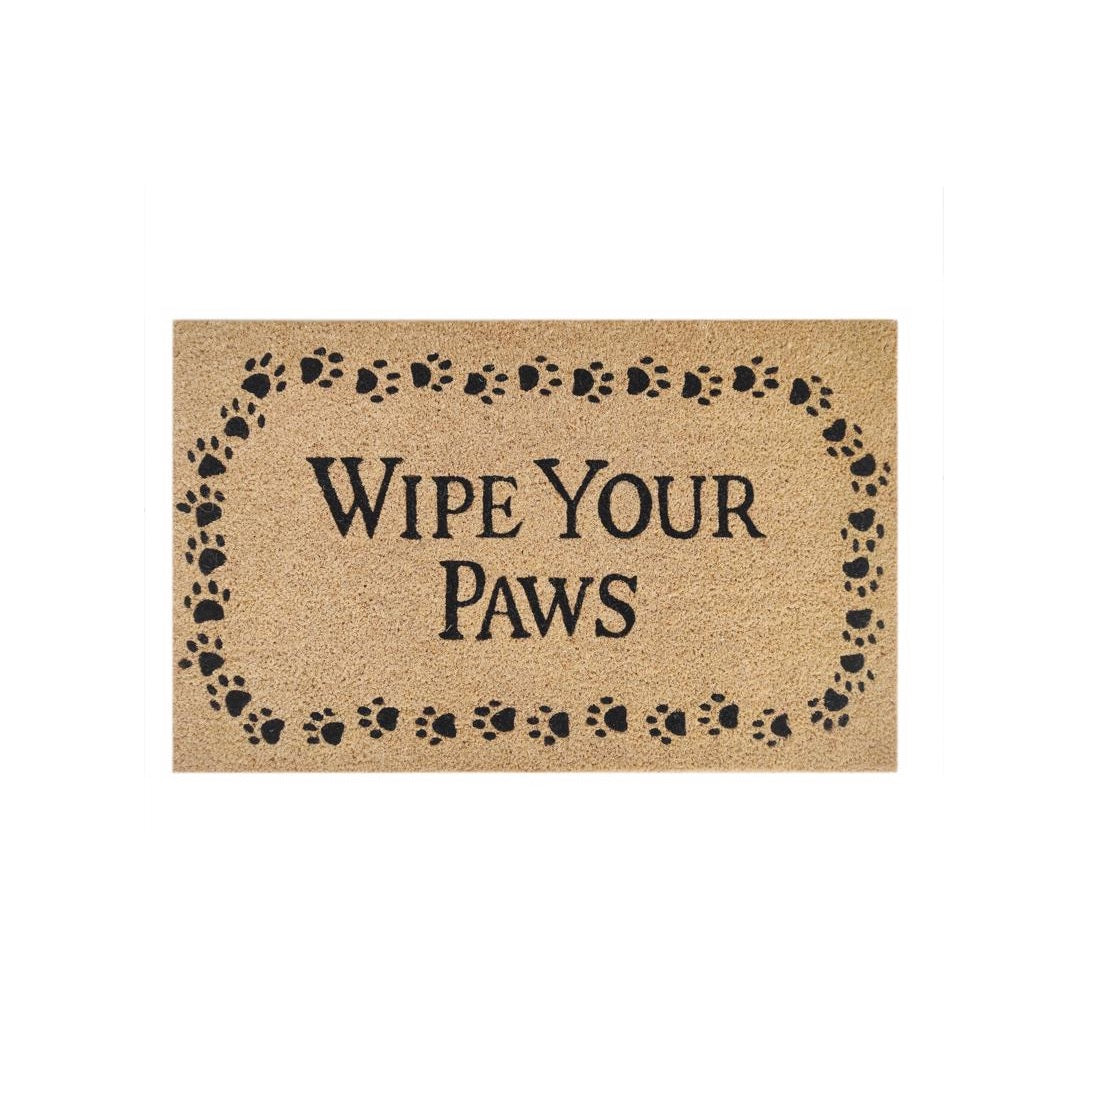 First Concept FC-72025 Wipe Your Paws Coir Door Mat, Black/Brown